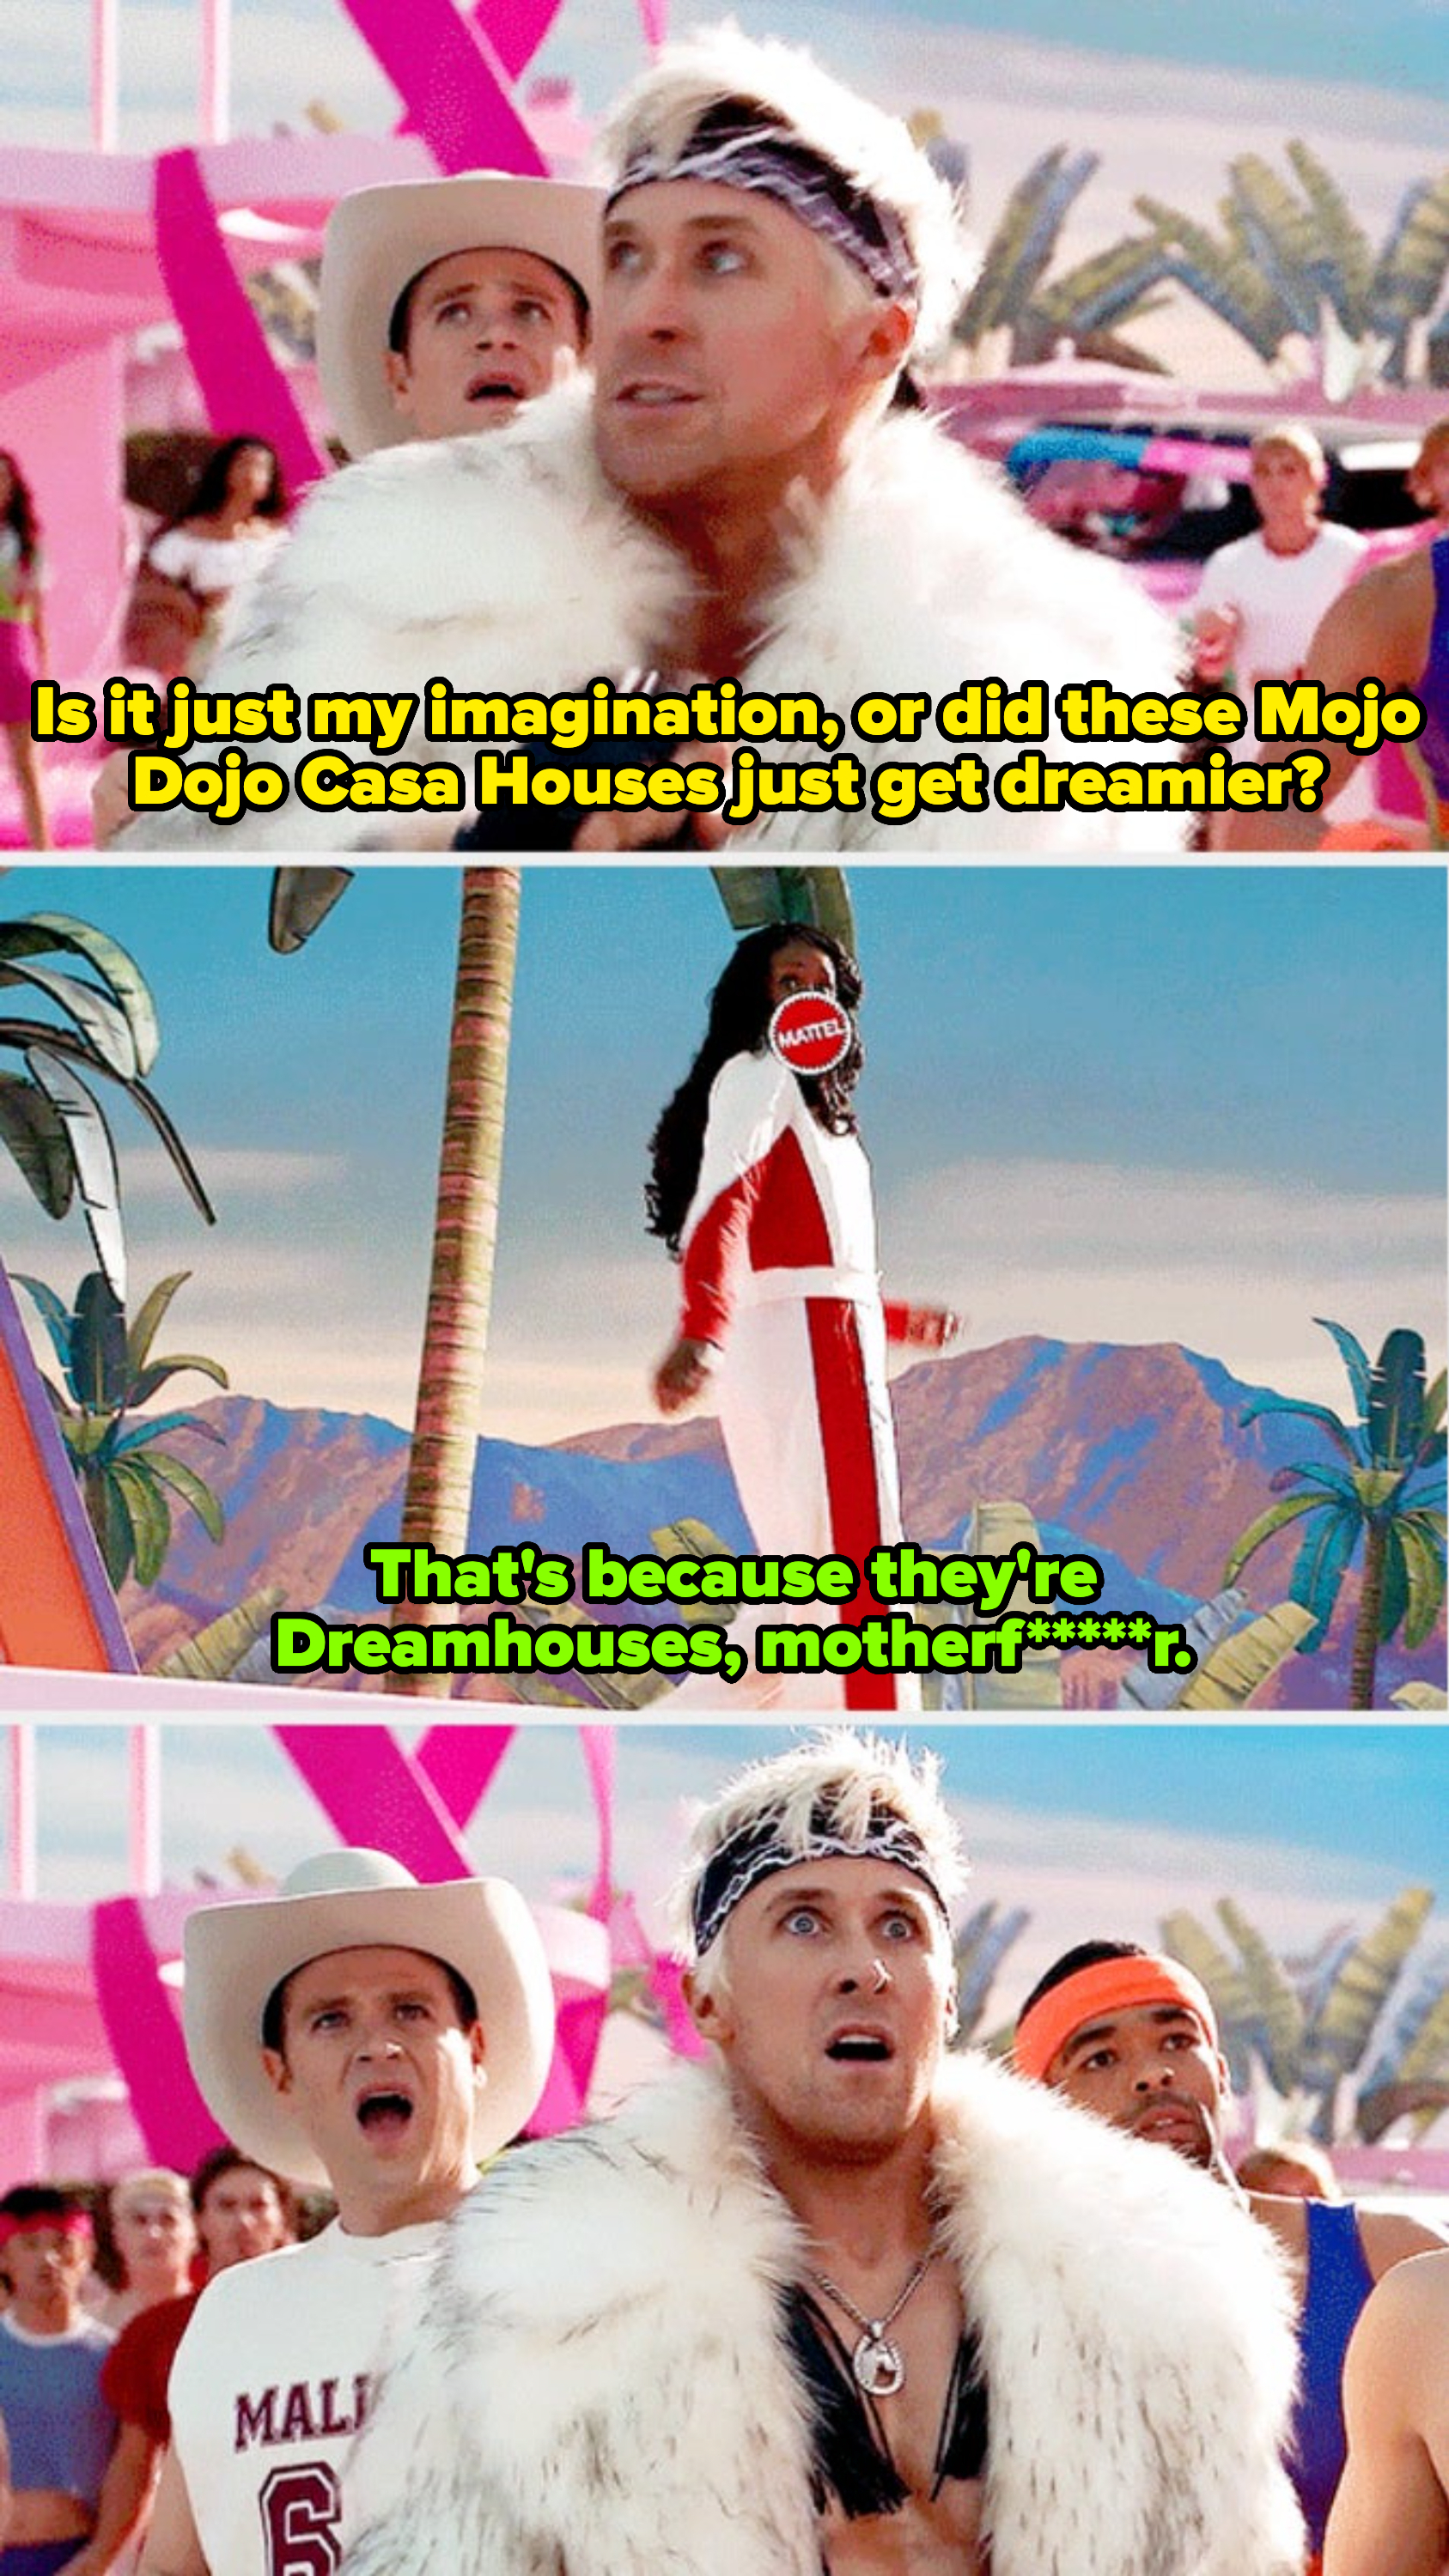 Issa Rae and Ryan Gosling in &quot;Barbie,&quot; with Kek saying &quot;Is it just my imagination, or did these Mojo Dojo Casa Houses just get dreamier?&quot;